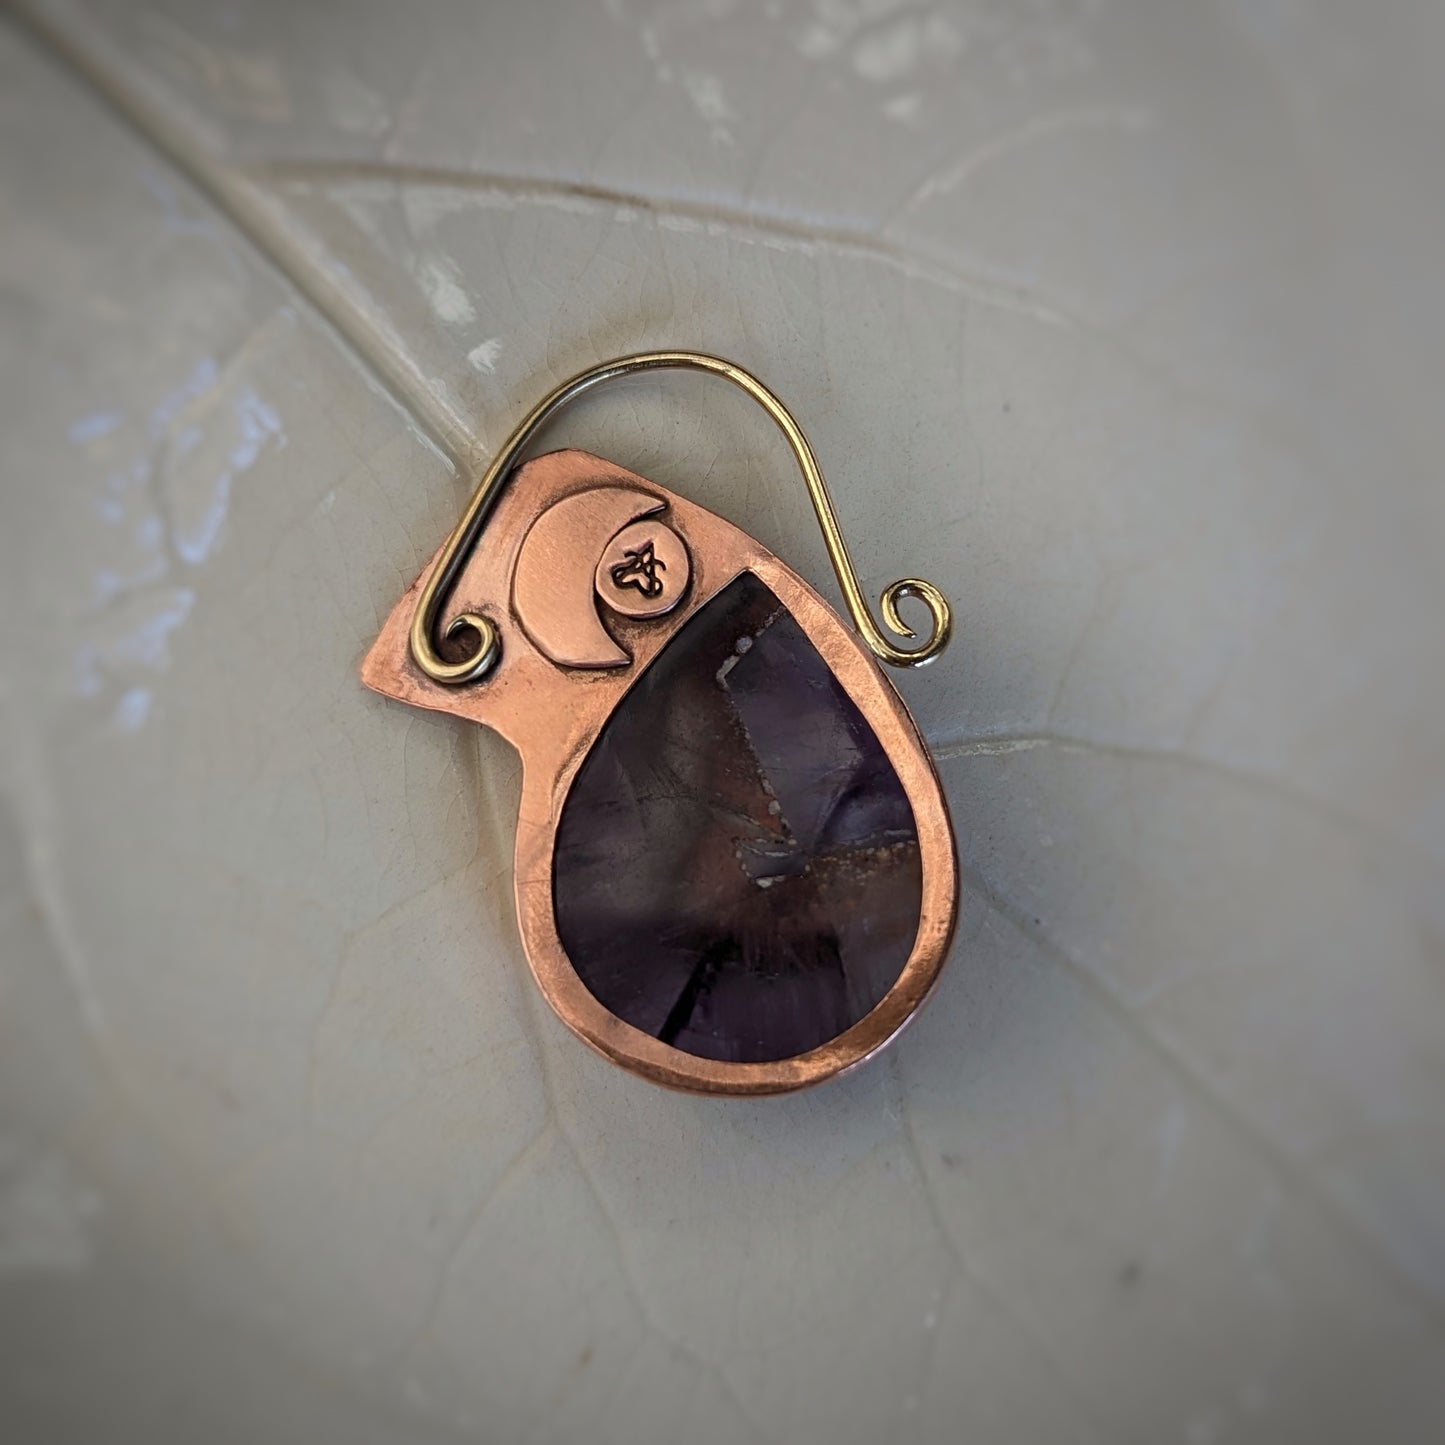 The back of the copper and brass pendant with a teardrop shaped cutout to show off the amethyst with a moon and the Aras Sivad logo on the other side of the moth.